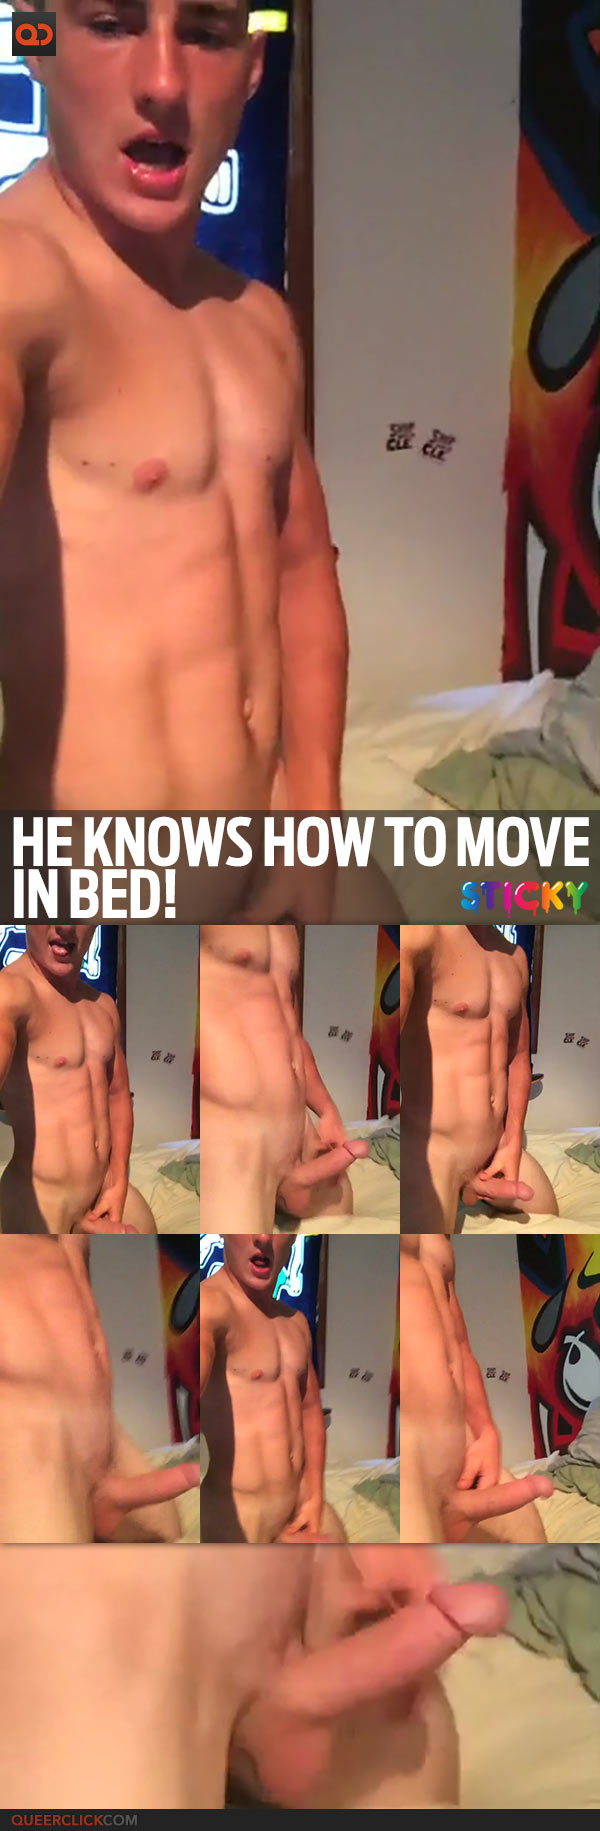 He Knows How To Move In Bed!